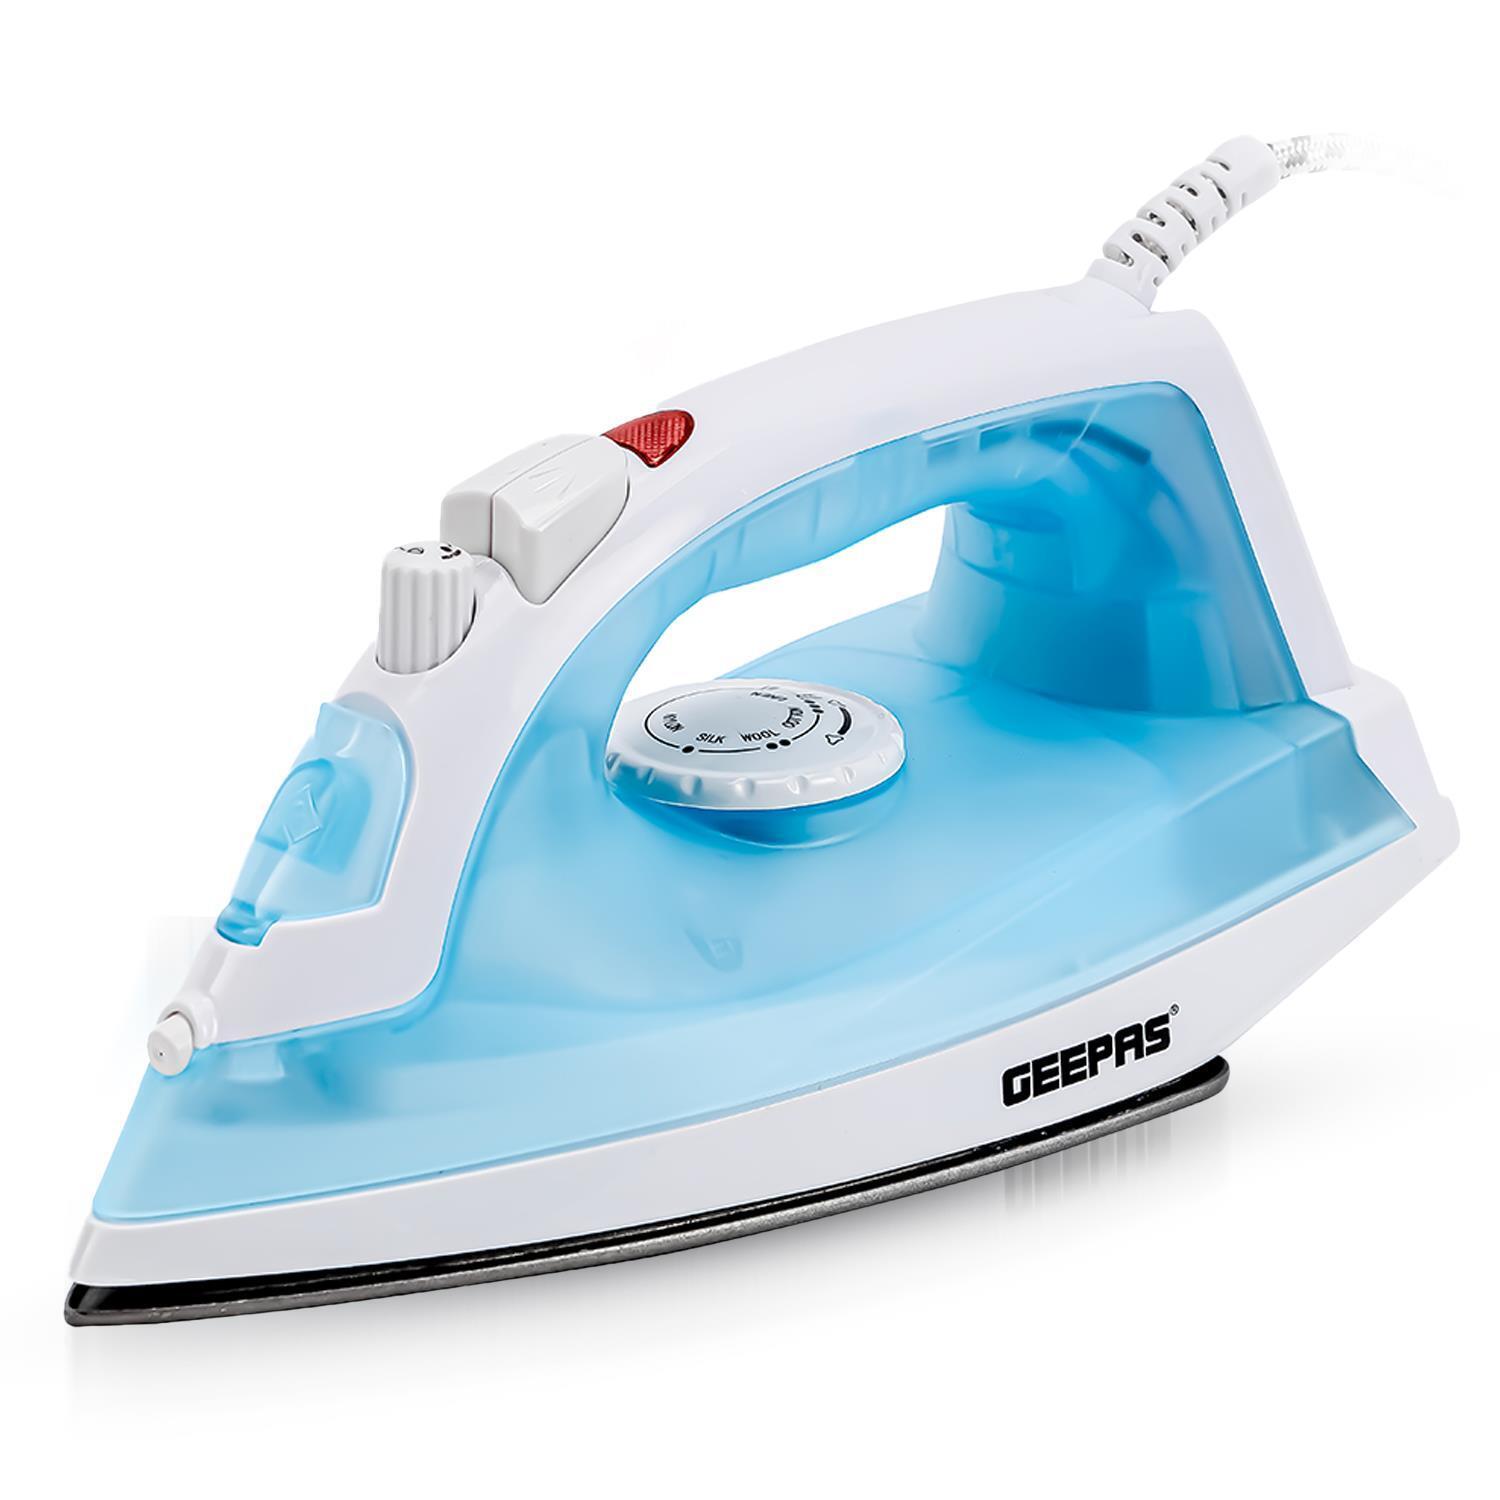 Blue 1600W Steam Iron with Non-Stick Soleplate and Adjustable Temperature